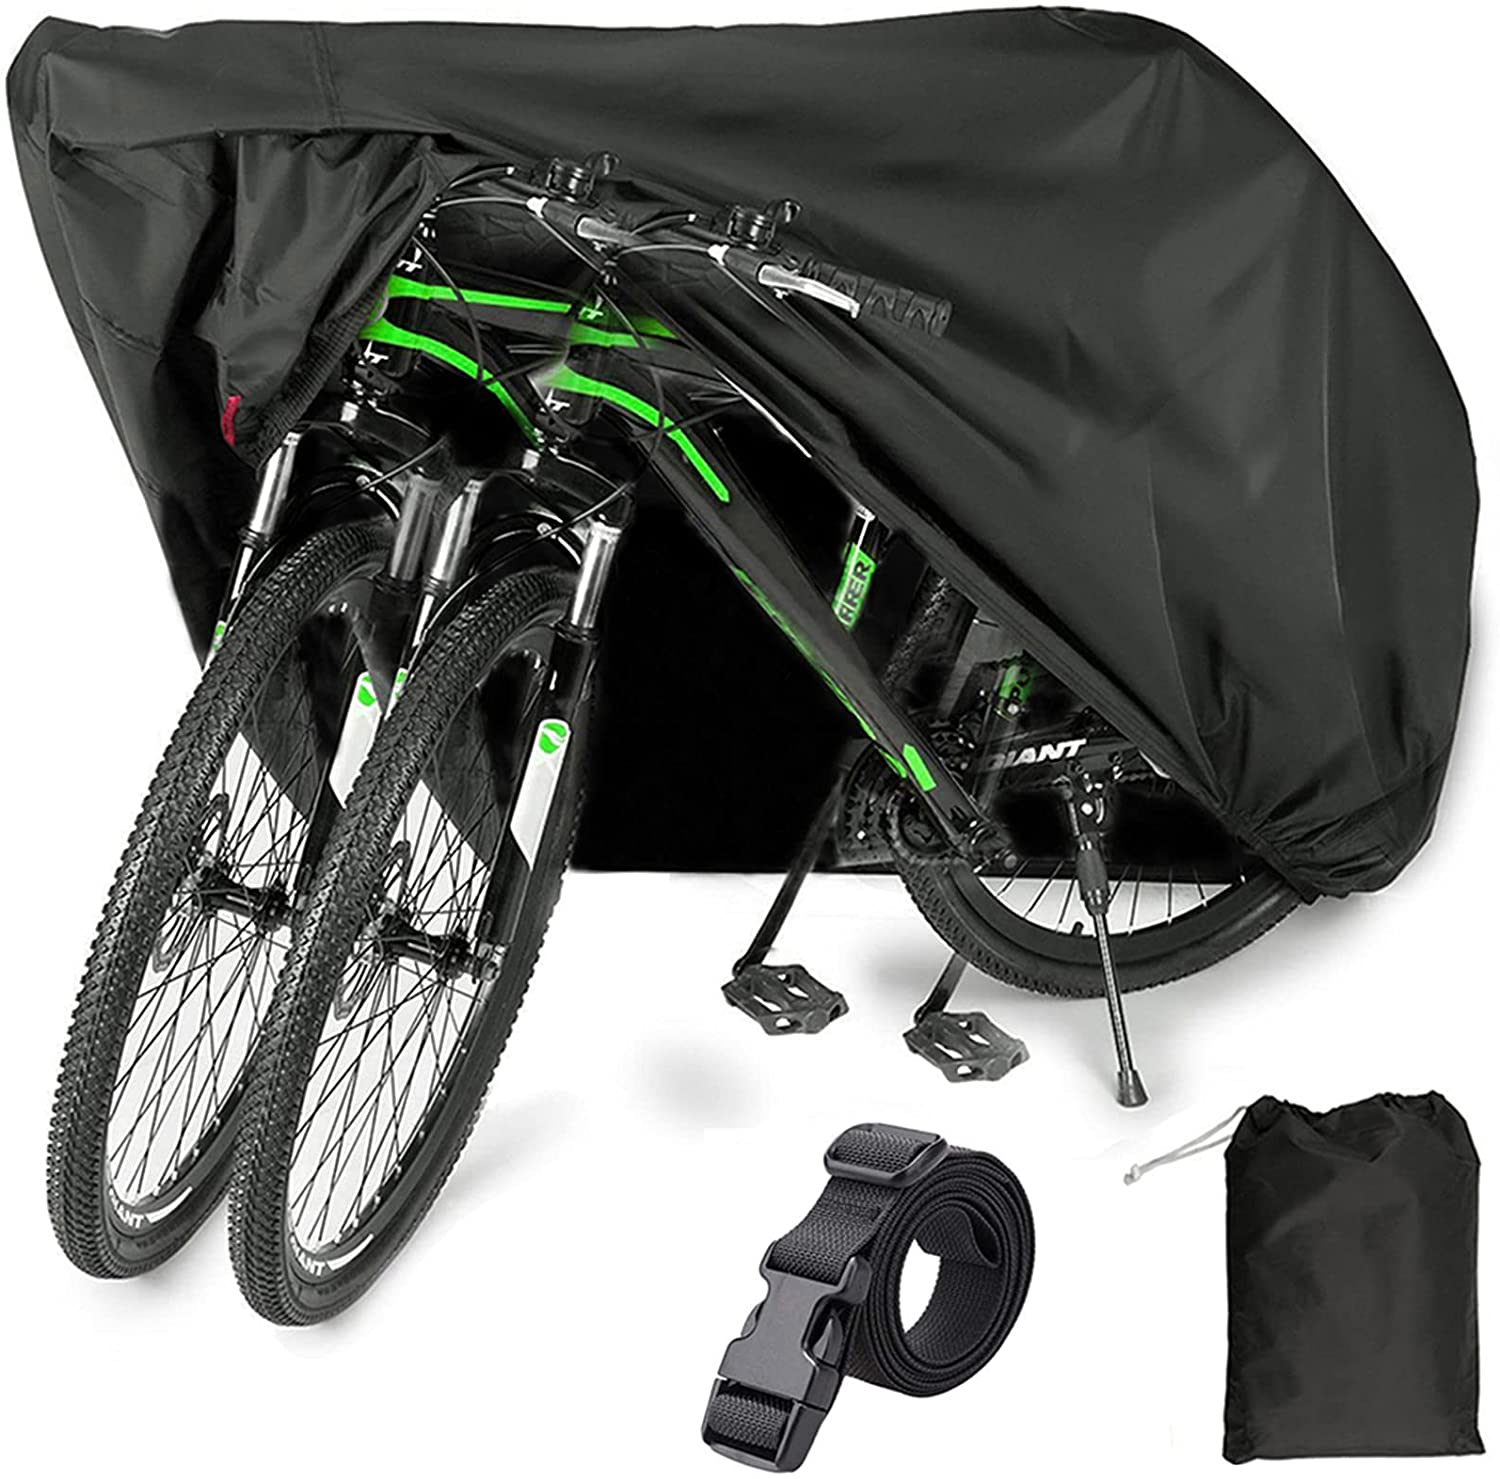 Ohuhu Bike Cover Waterproof Outdoor Bicycle Covers For Mountain And Road Bikes, 